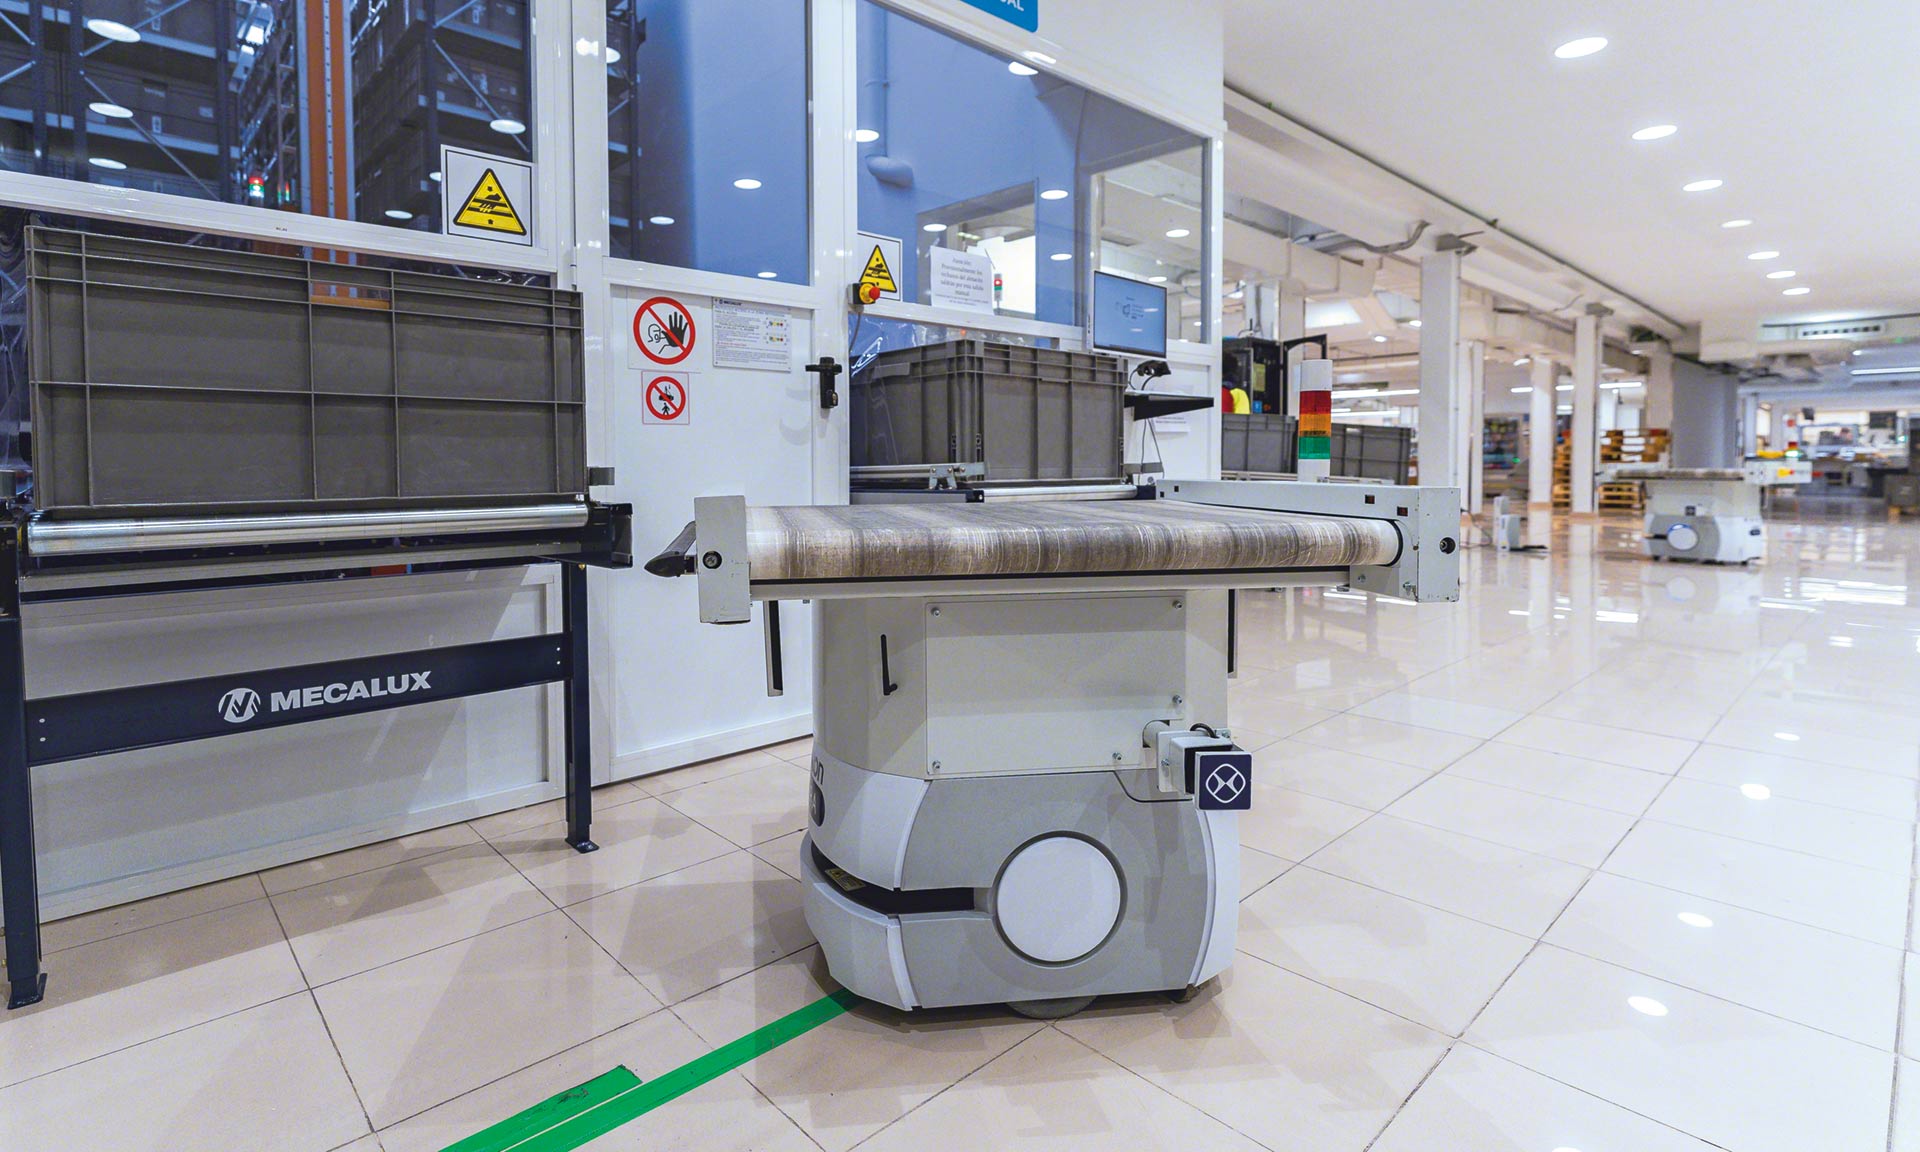 An AGV robot is an automated guided vehicle used in warehouses and production centers